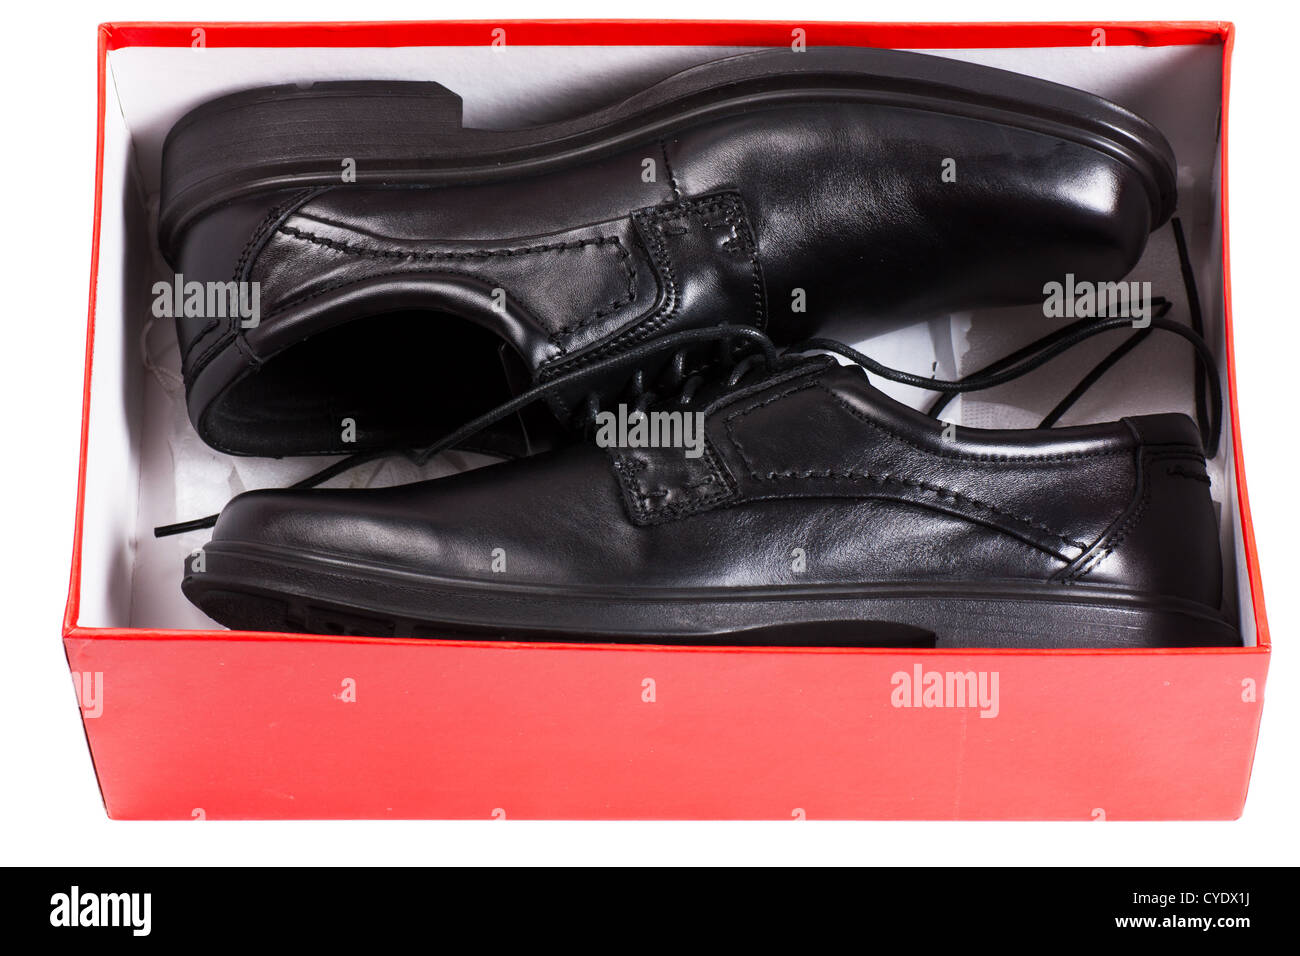 Shoes in a box Stock Photo - Alamy